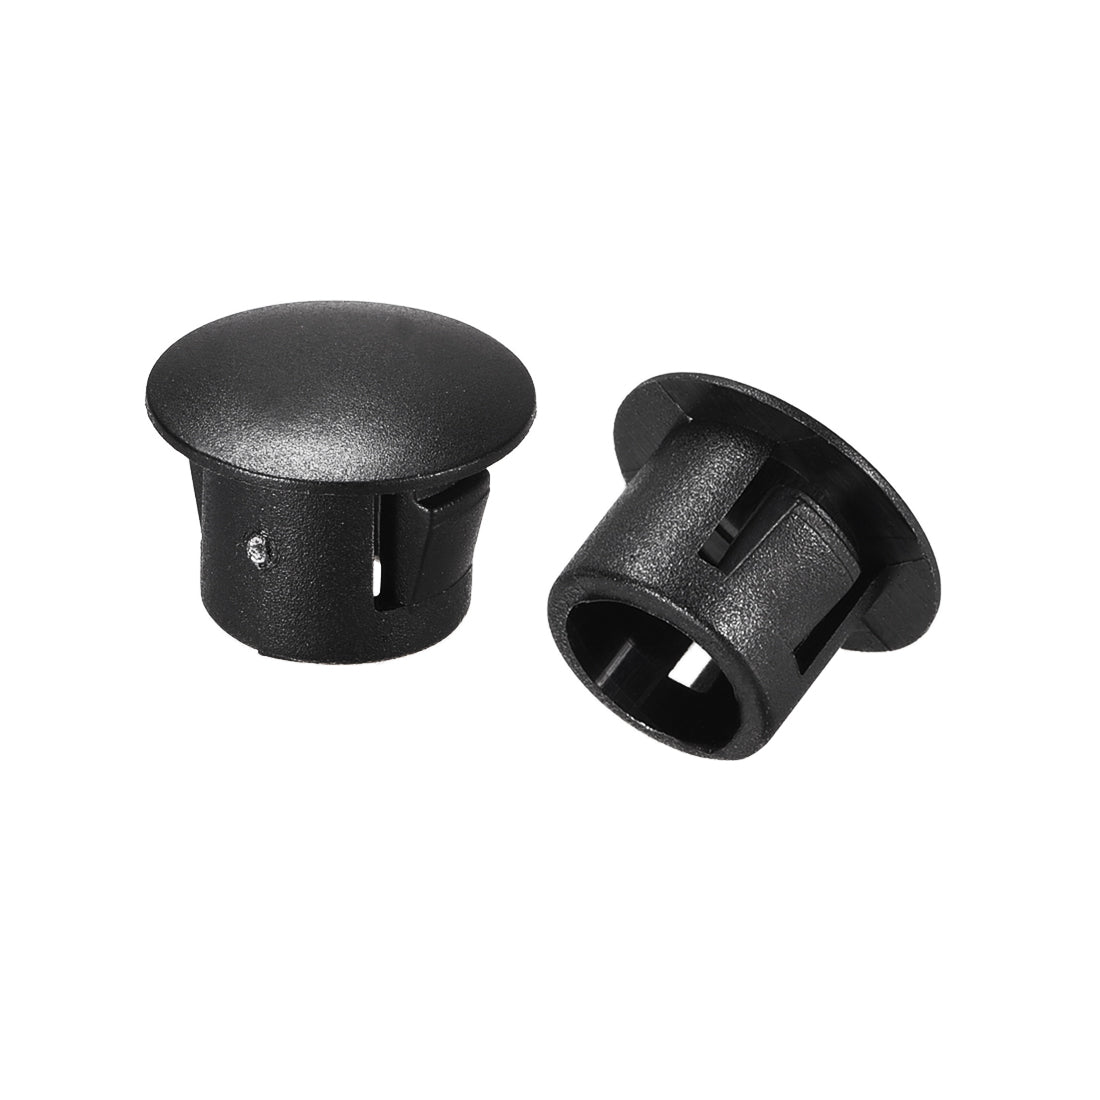 uxcell Uxcell 20pcs Mounting 8mm x 8mm Black Nylon Round Snap Panel Locking Hole Plugs Cover